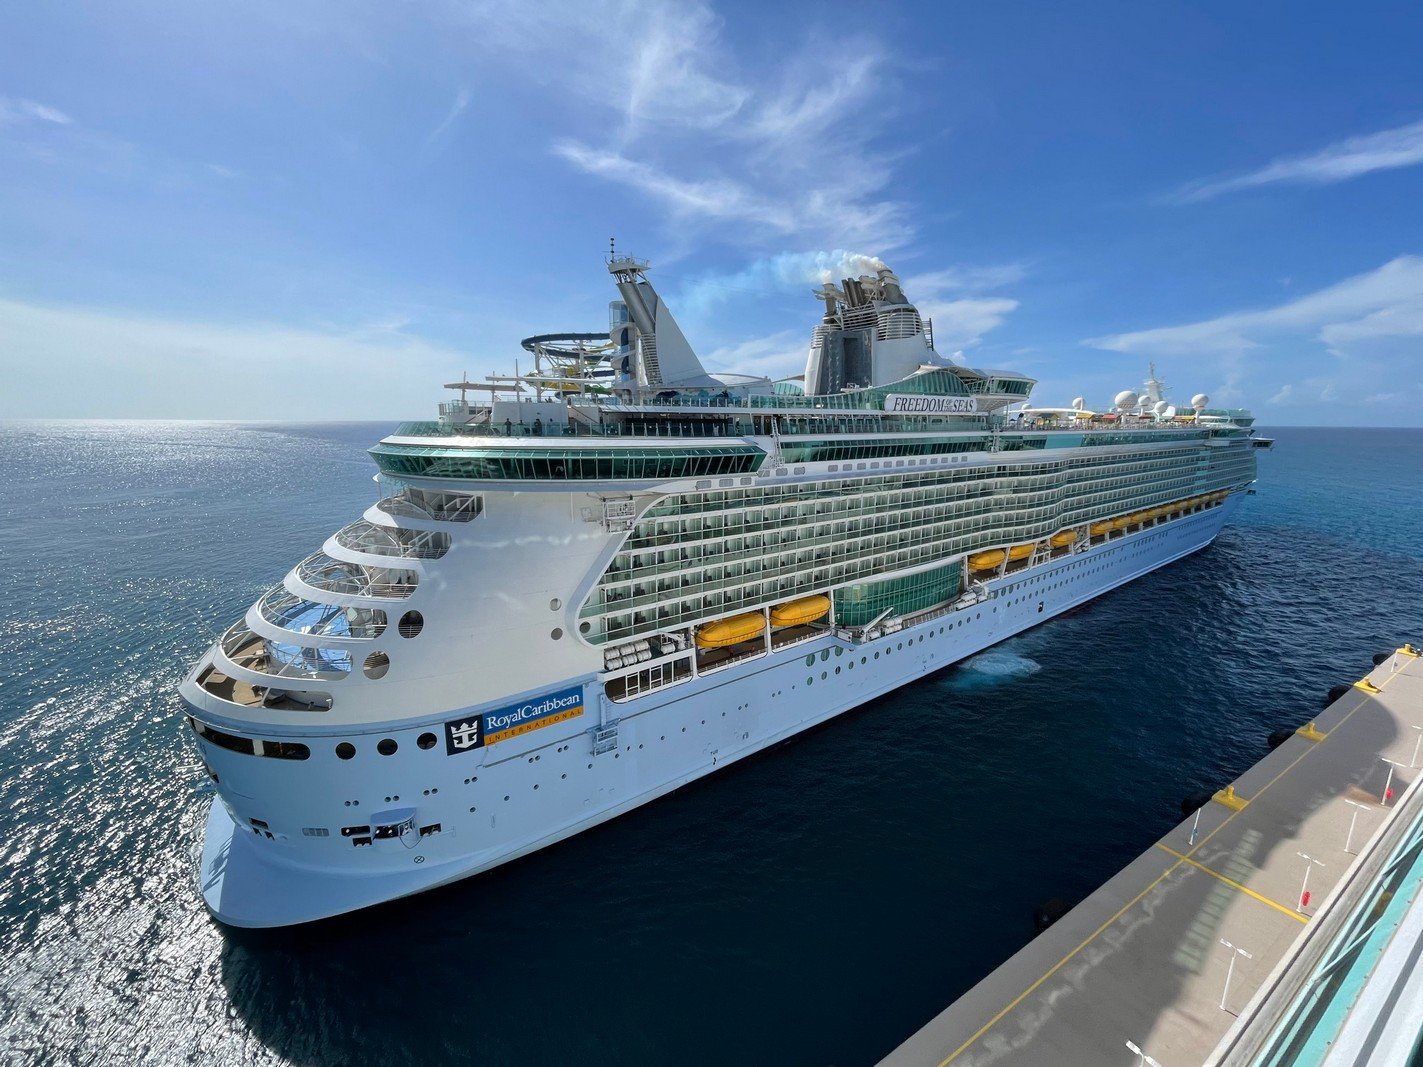 Live Blogging from Freedom of the Seas - Preamble | Royal Caribbean Blog